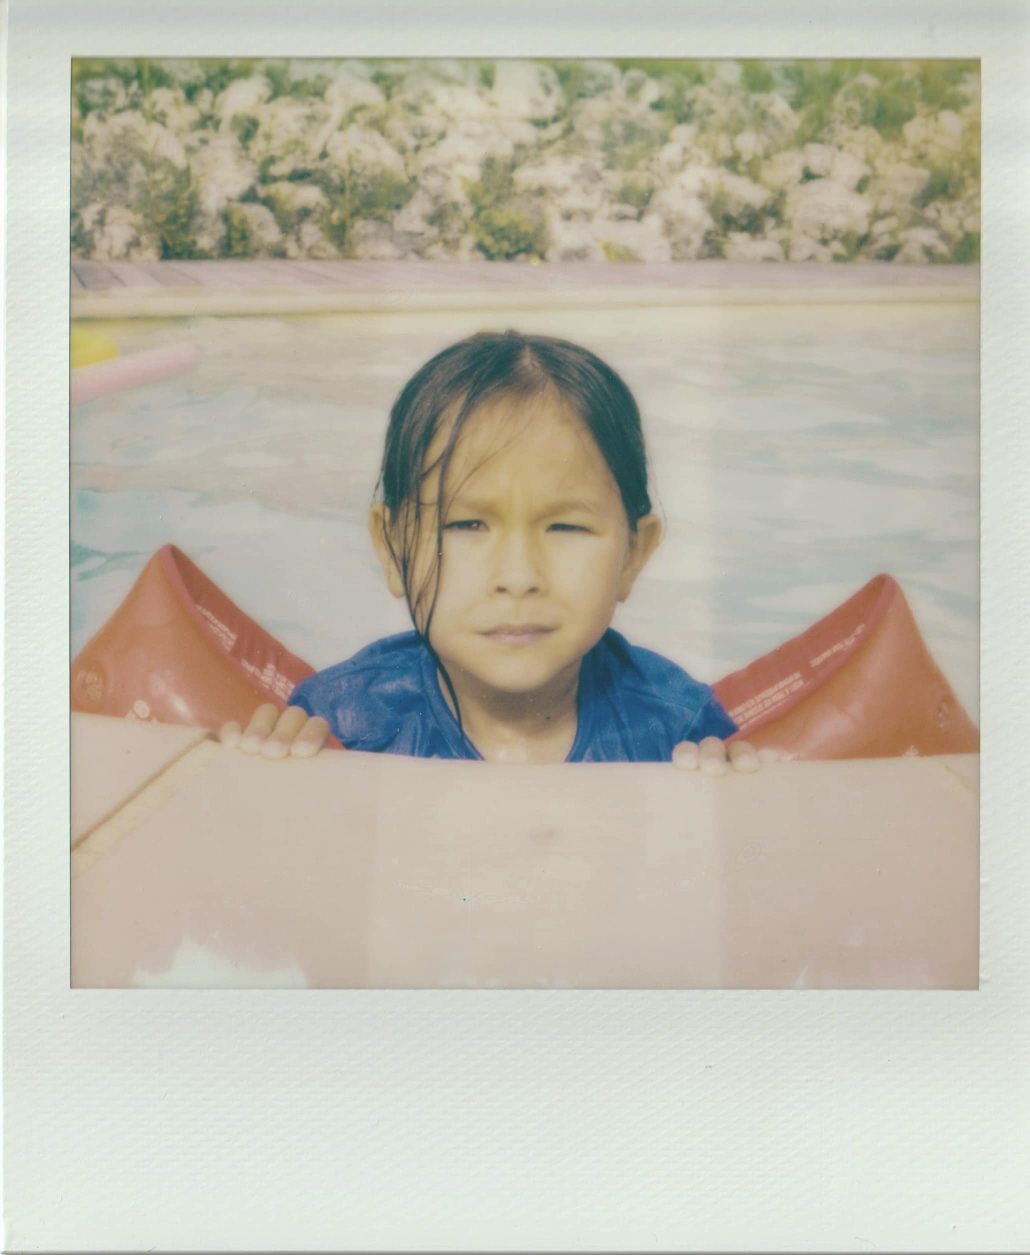 Little girl at the swimming pool